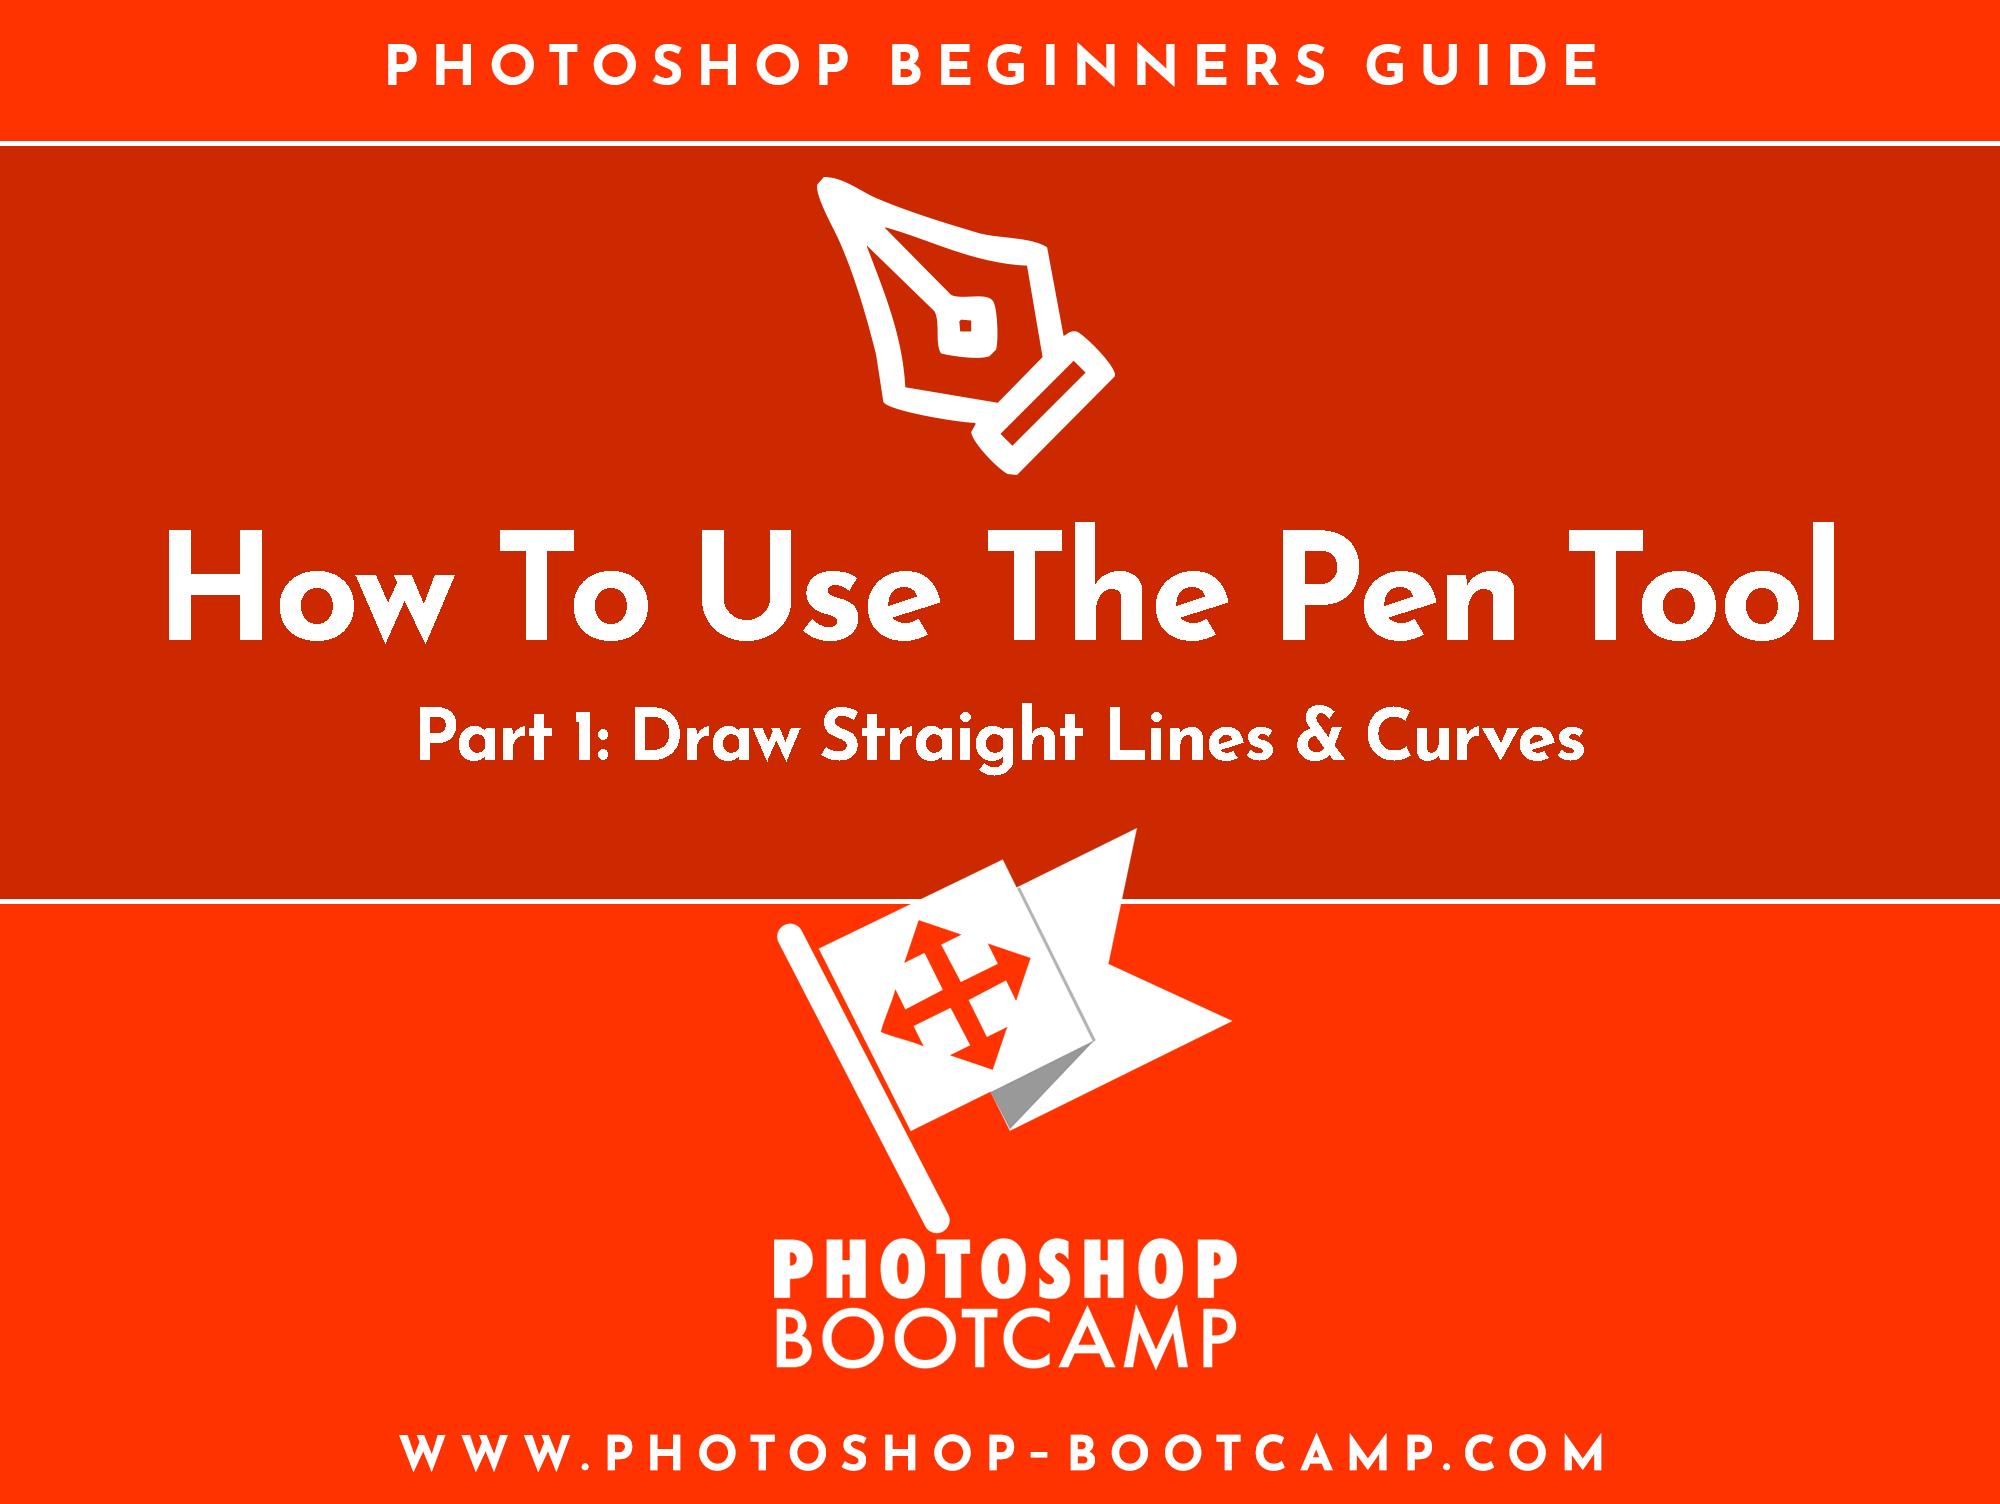 How To Use The Pen Tool In Photoshop Part 1 - Photoshop For Beginners